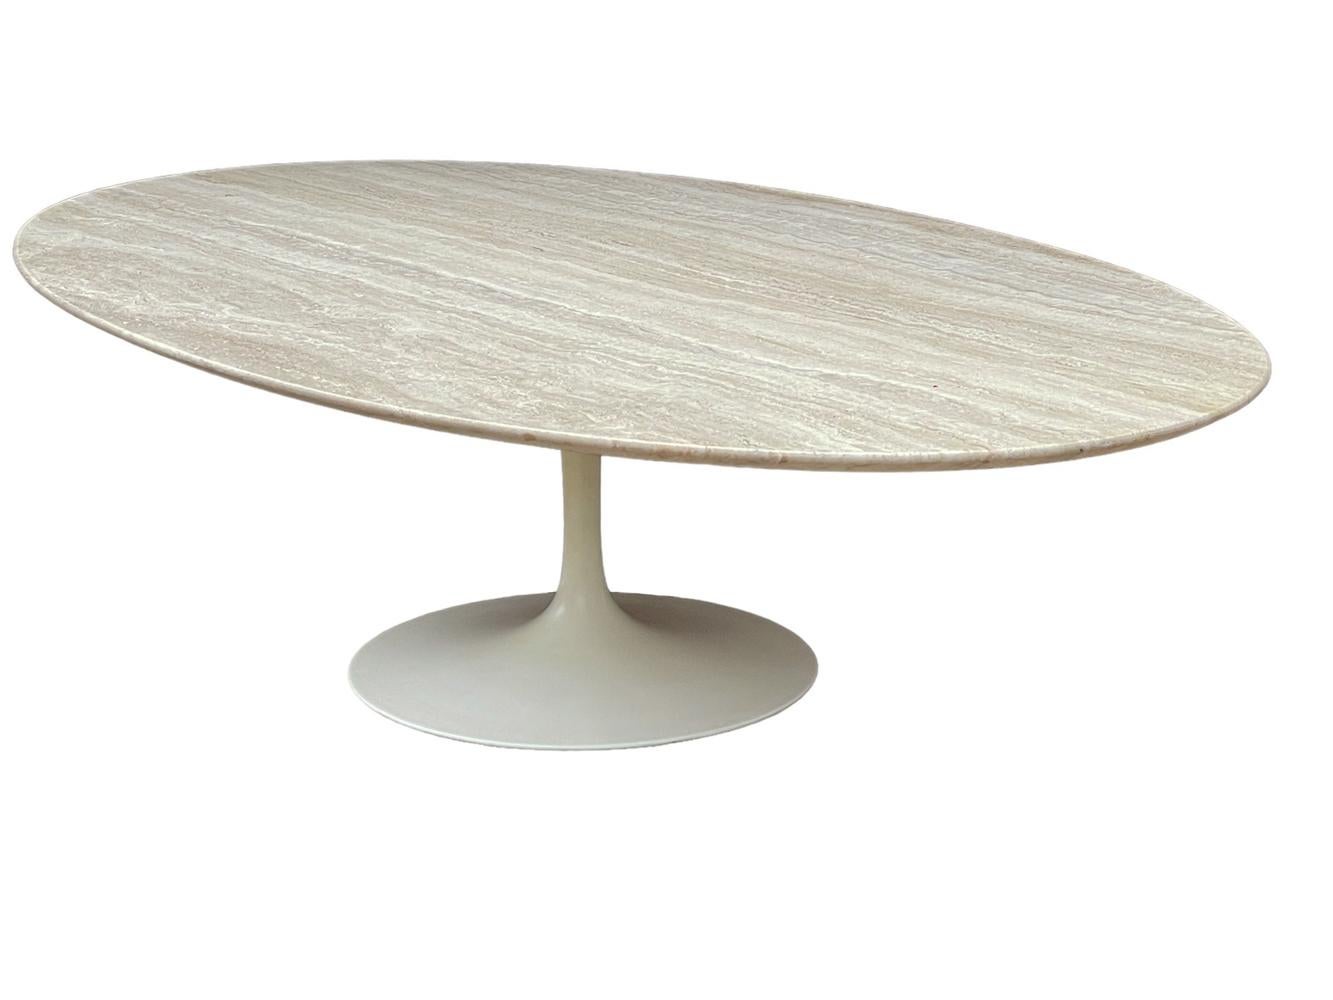 Mid Century Modern Oval Travertine Marble Cocktail Table by Saarinen for Knoll  For Sale 3